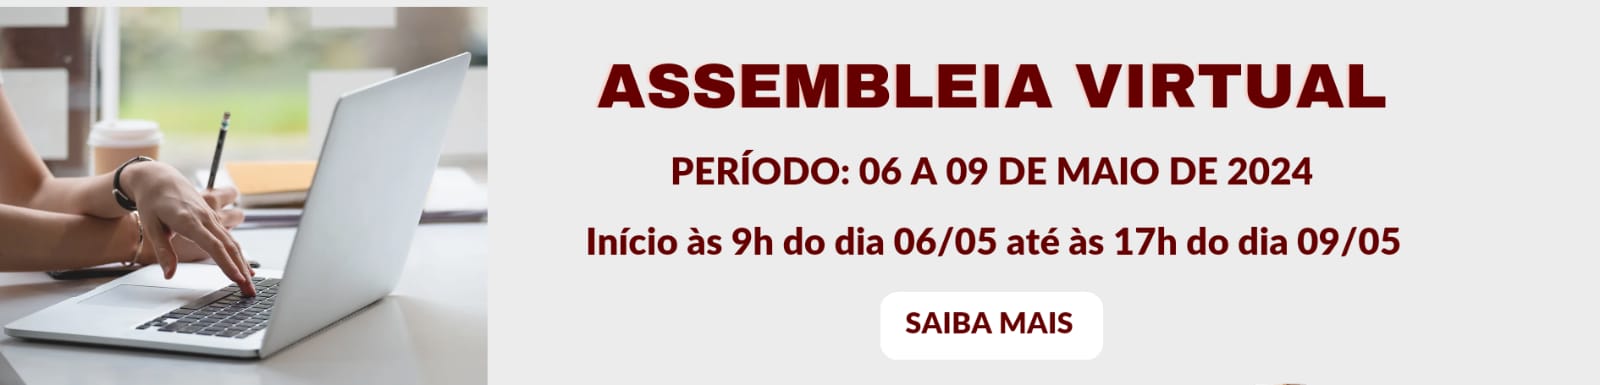 https://www.anberr.org.br/2.0/_noticia-base.php?id=1319